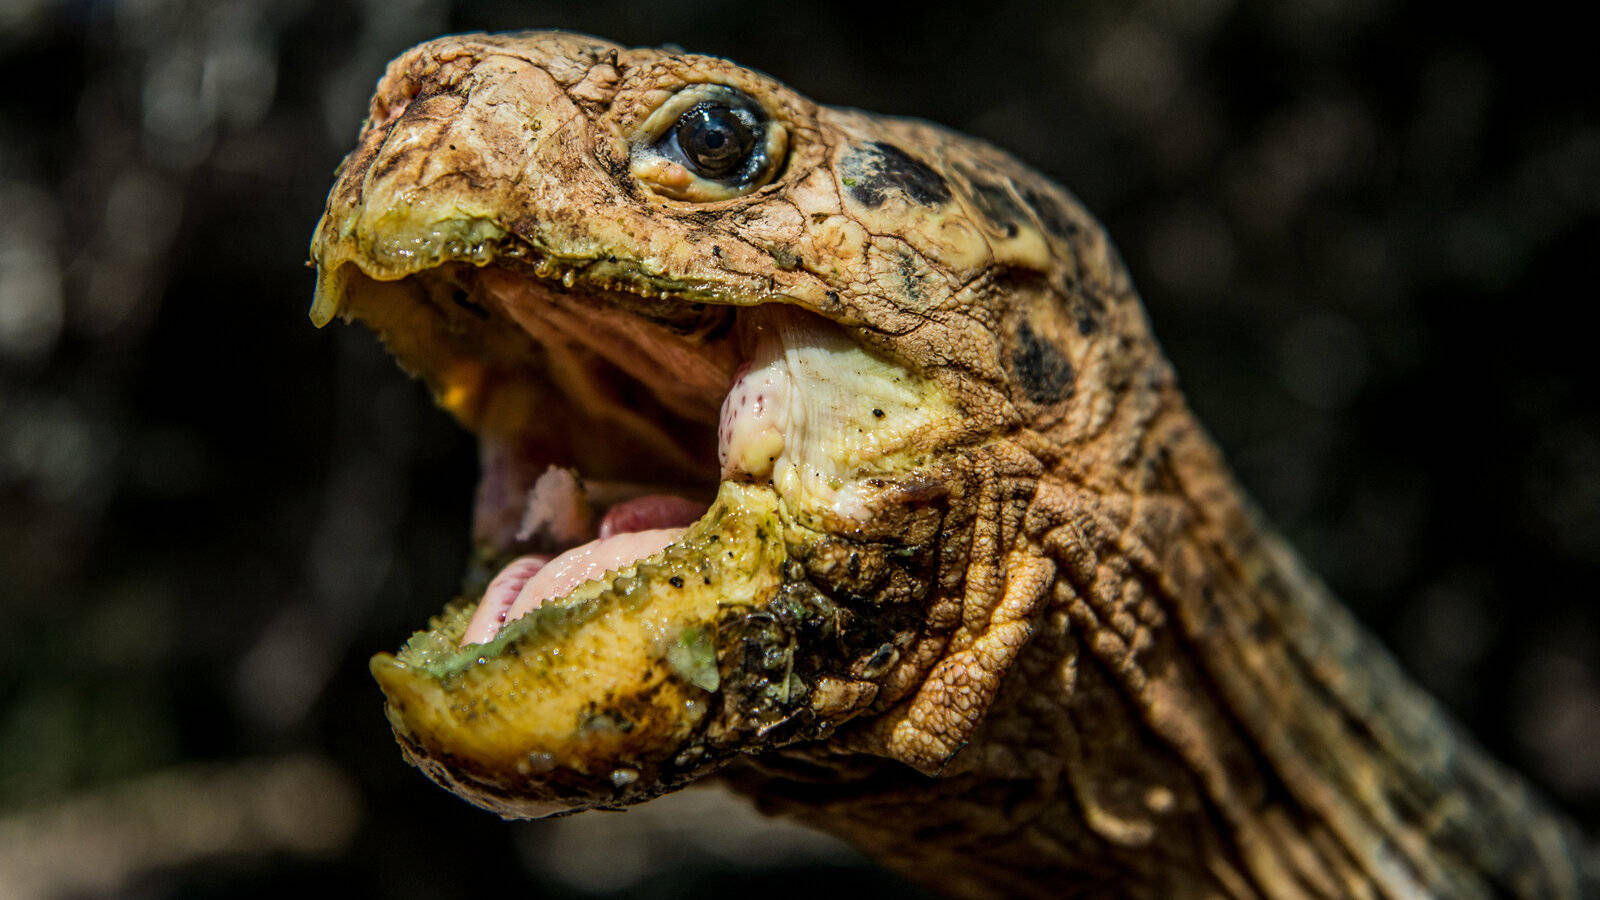 Awe-inspiring Capture of an Open-Mouthed Tortoise Wallpaper